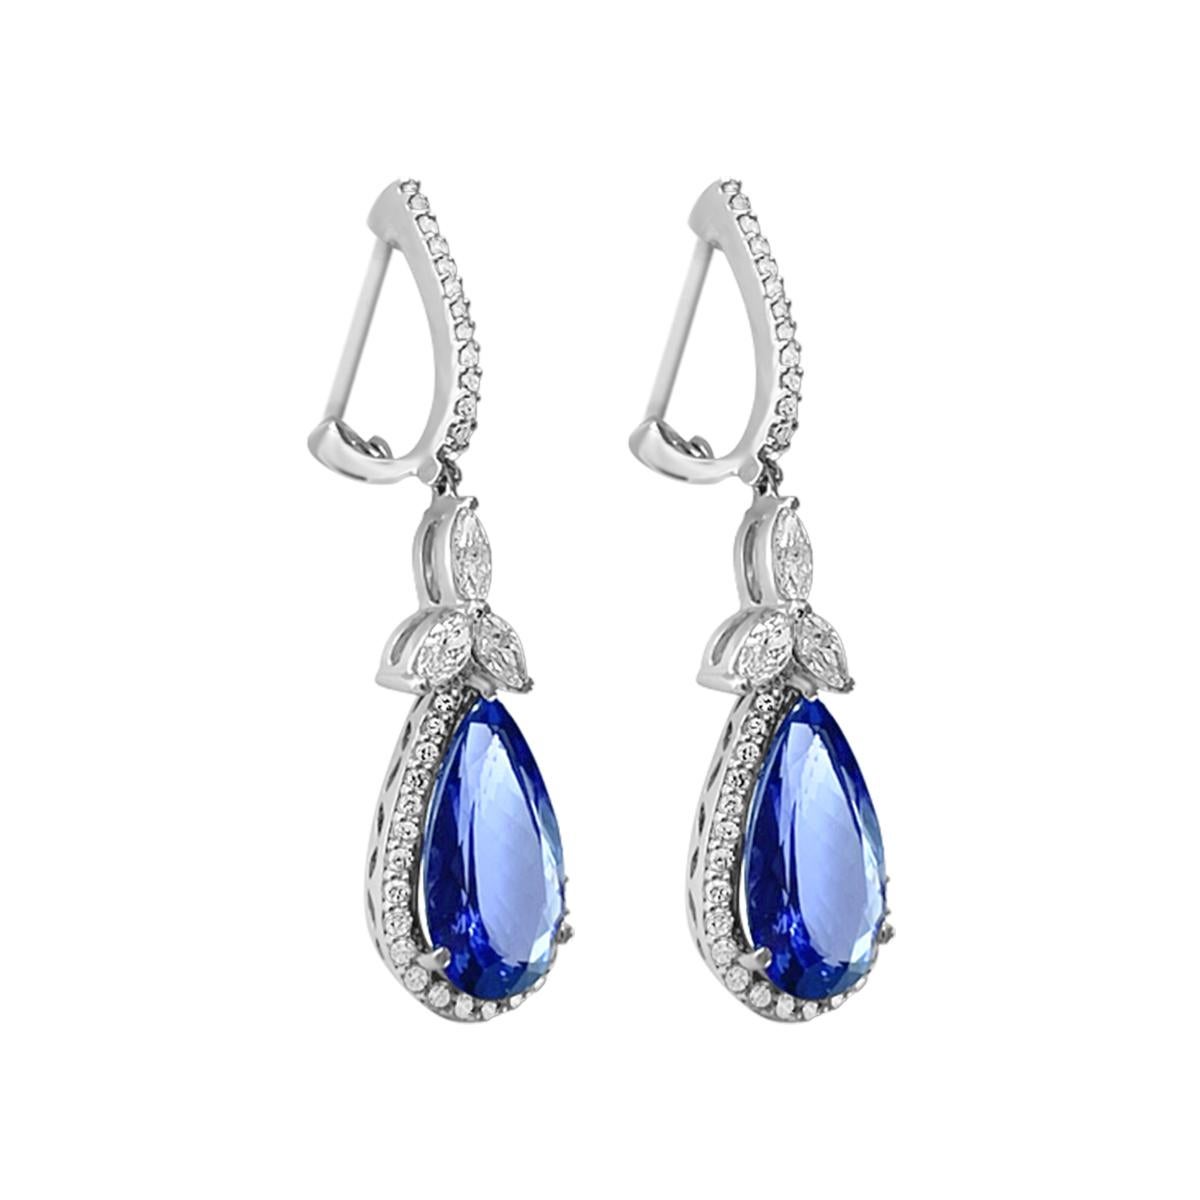 Tanzanite pear shape dangle earrings. Beautiful Tanzanite color and fine cut makes this earring exceptional.

Style# E5063
Tanzanite: Pear 15.3x9mm 8.60cts
Diamond: 90pcs 1.68cts